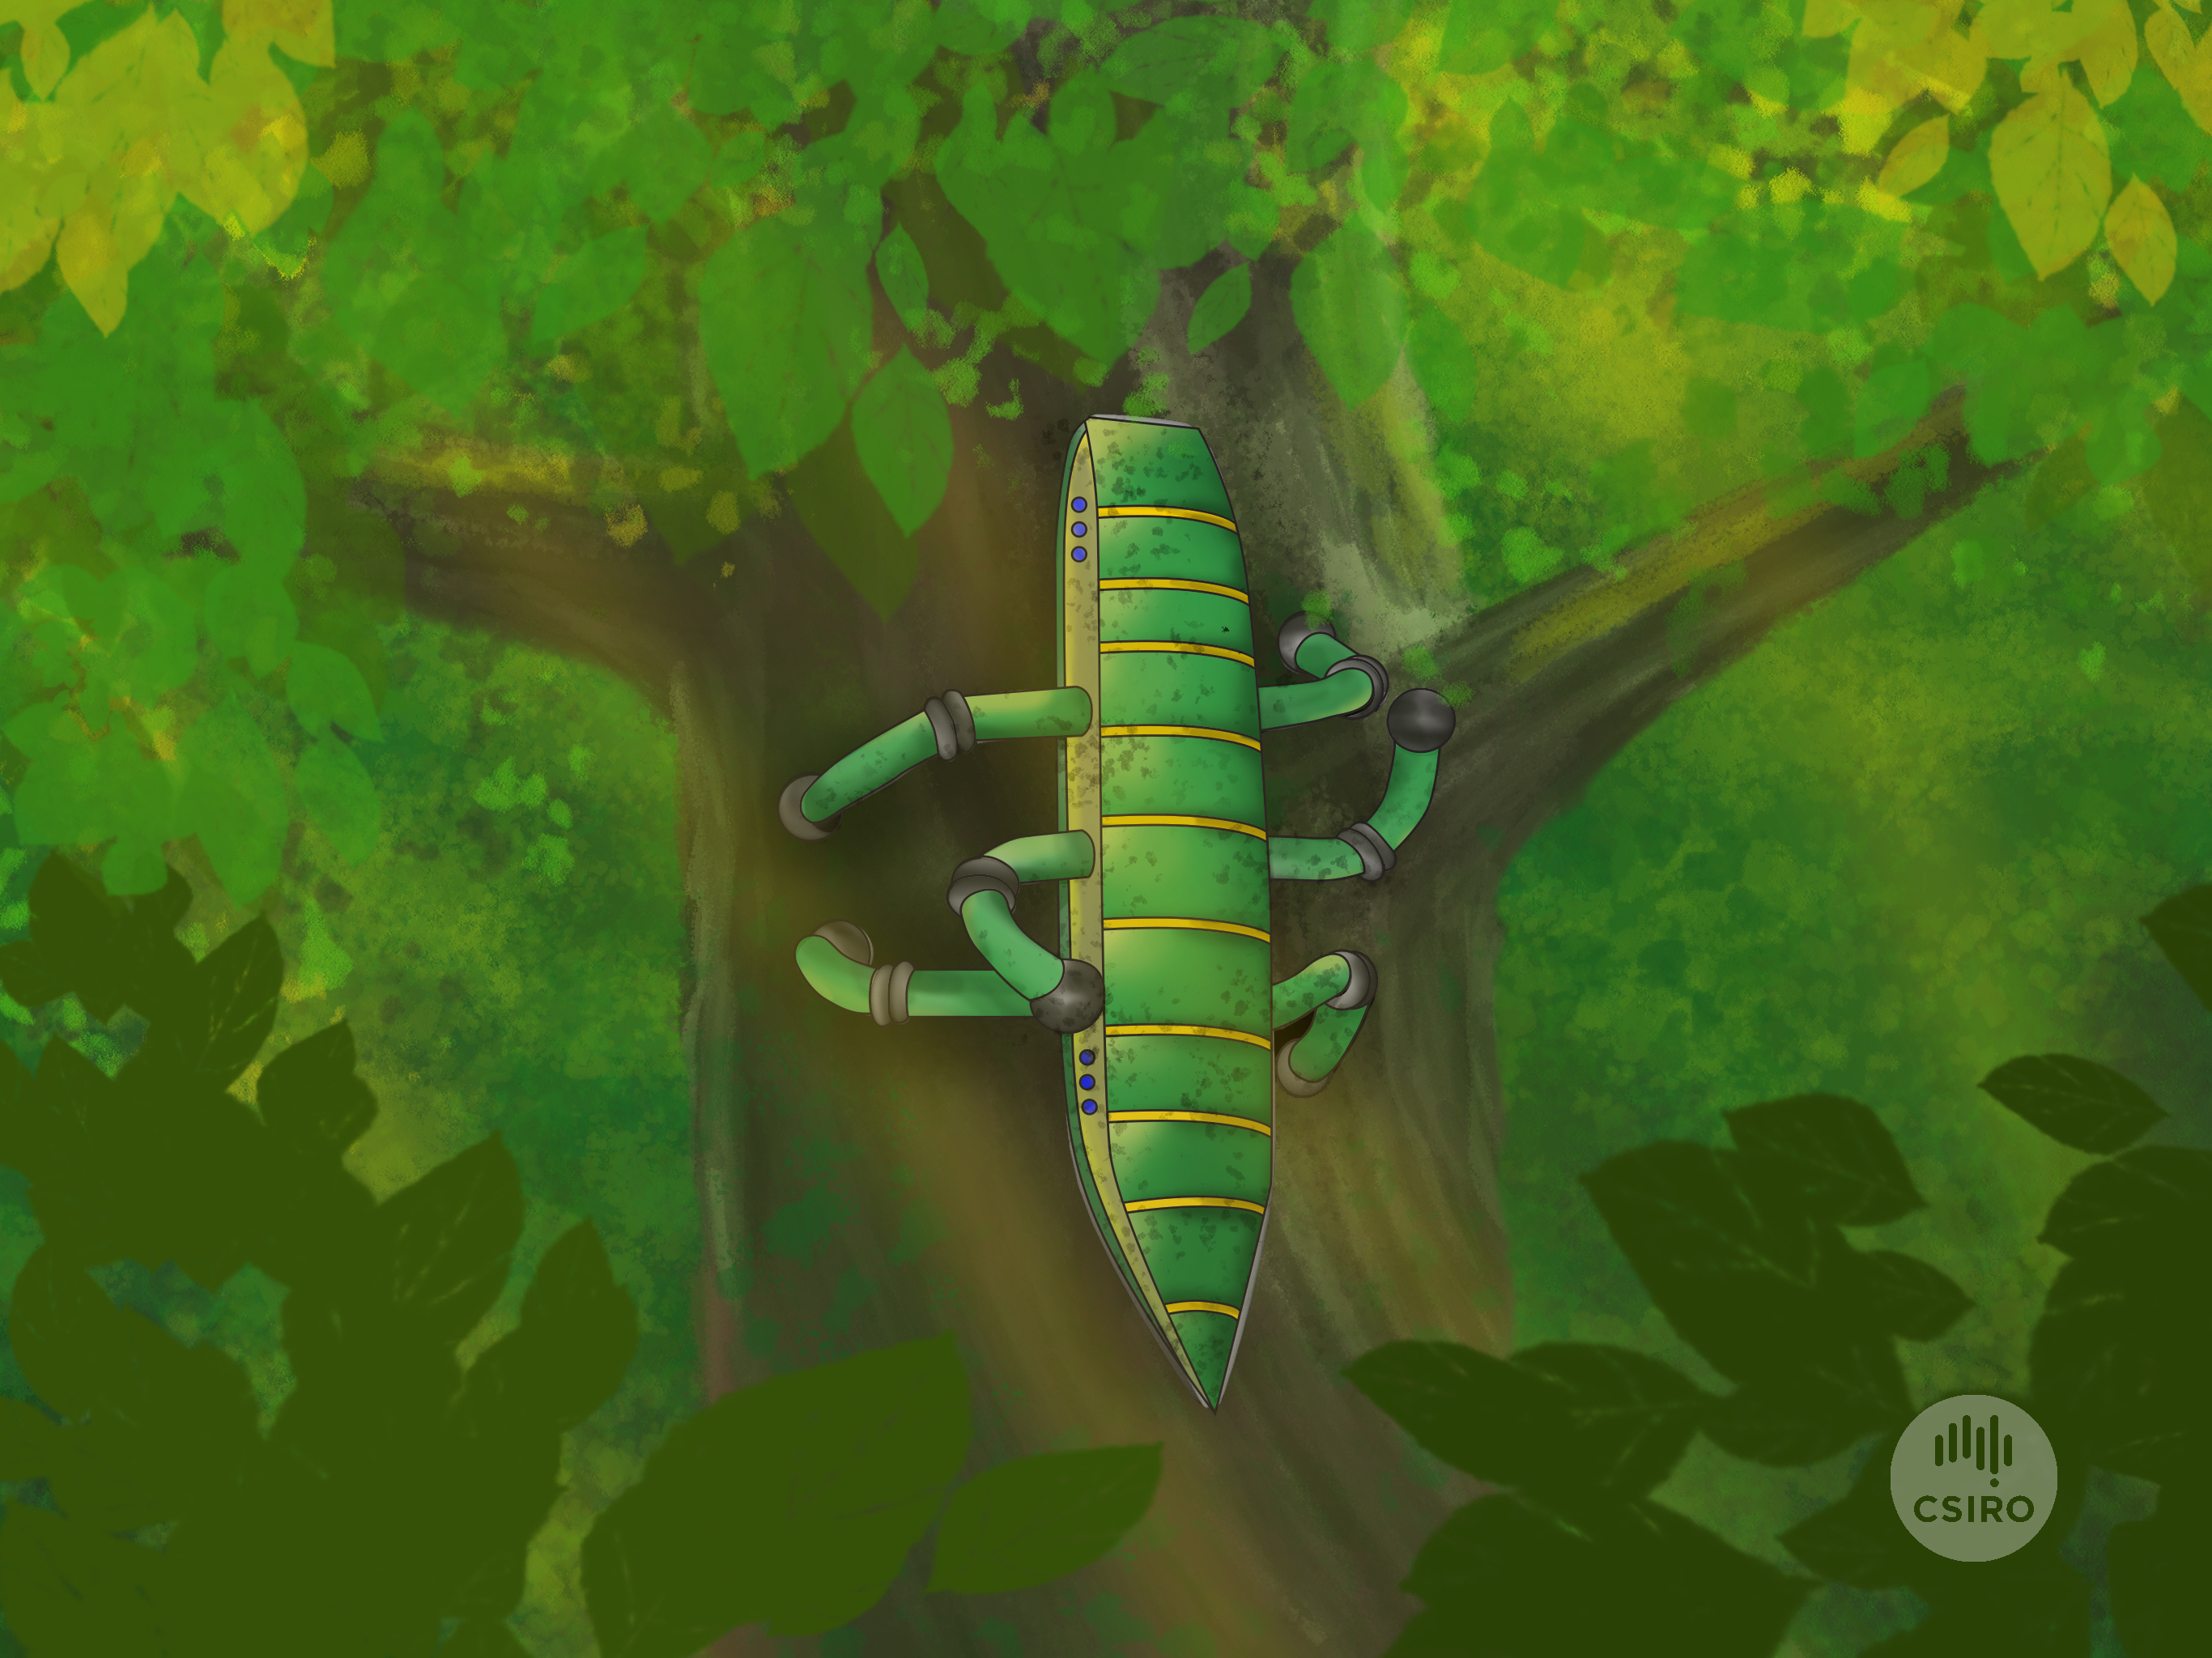 An artist’s impression of a robot for use in the Amazon. Based on tree crawling lizards and gecko, it would have articulated legs for more flexibility and climbing.